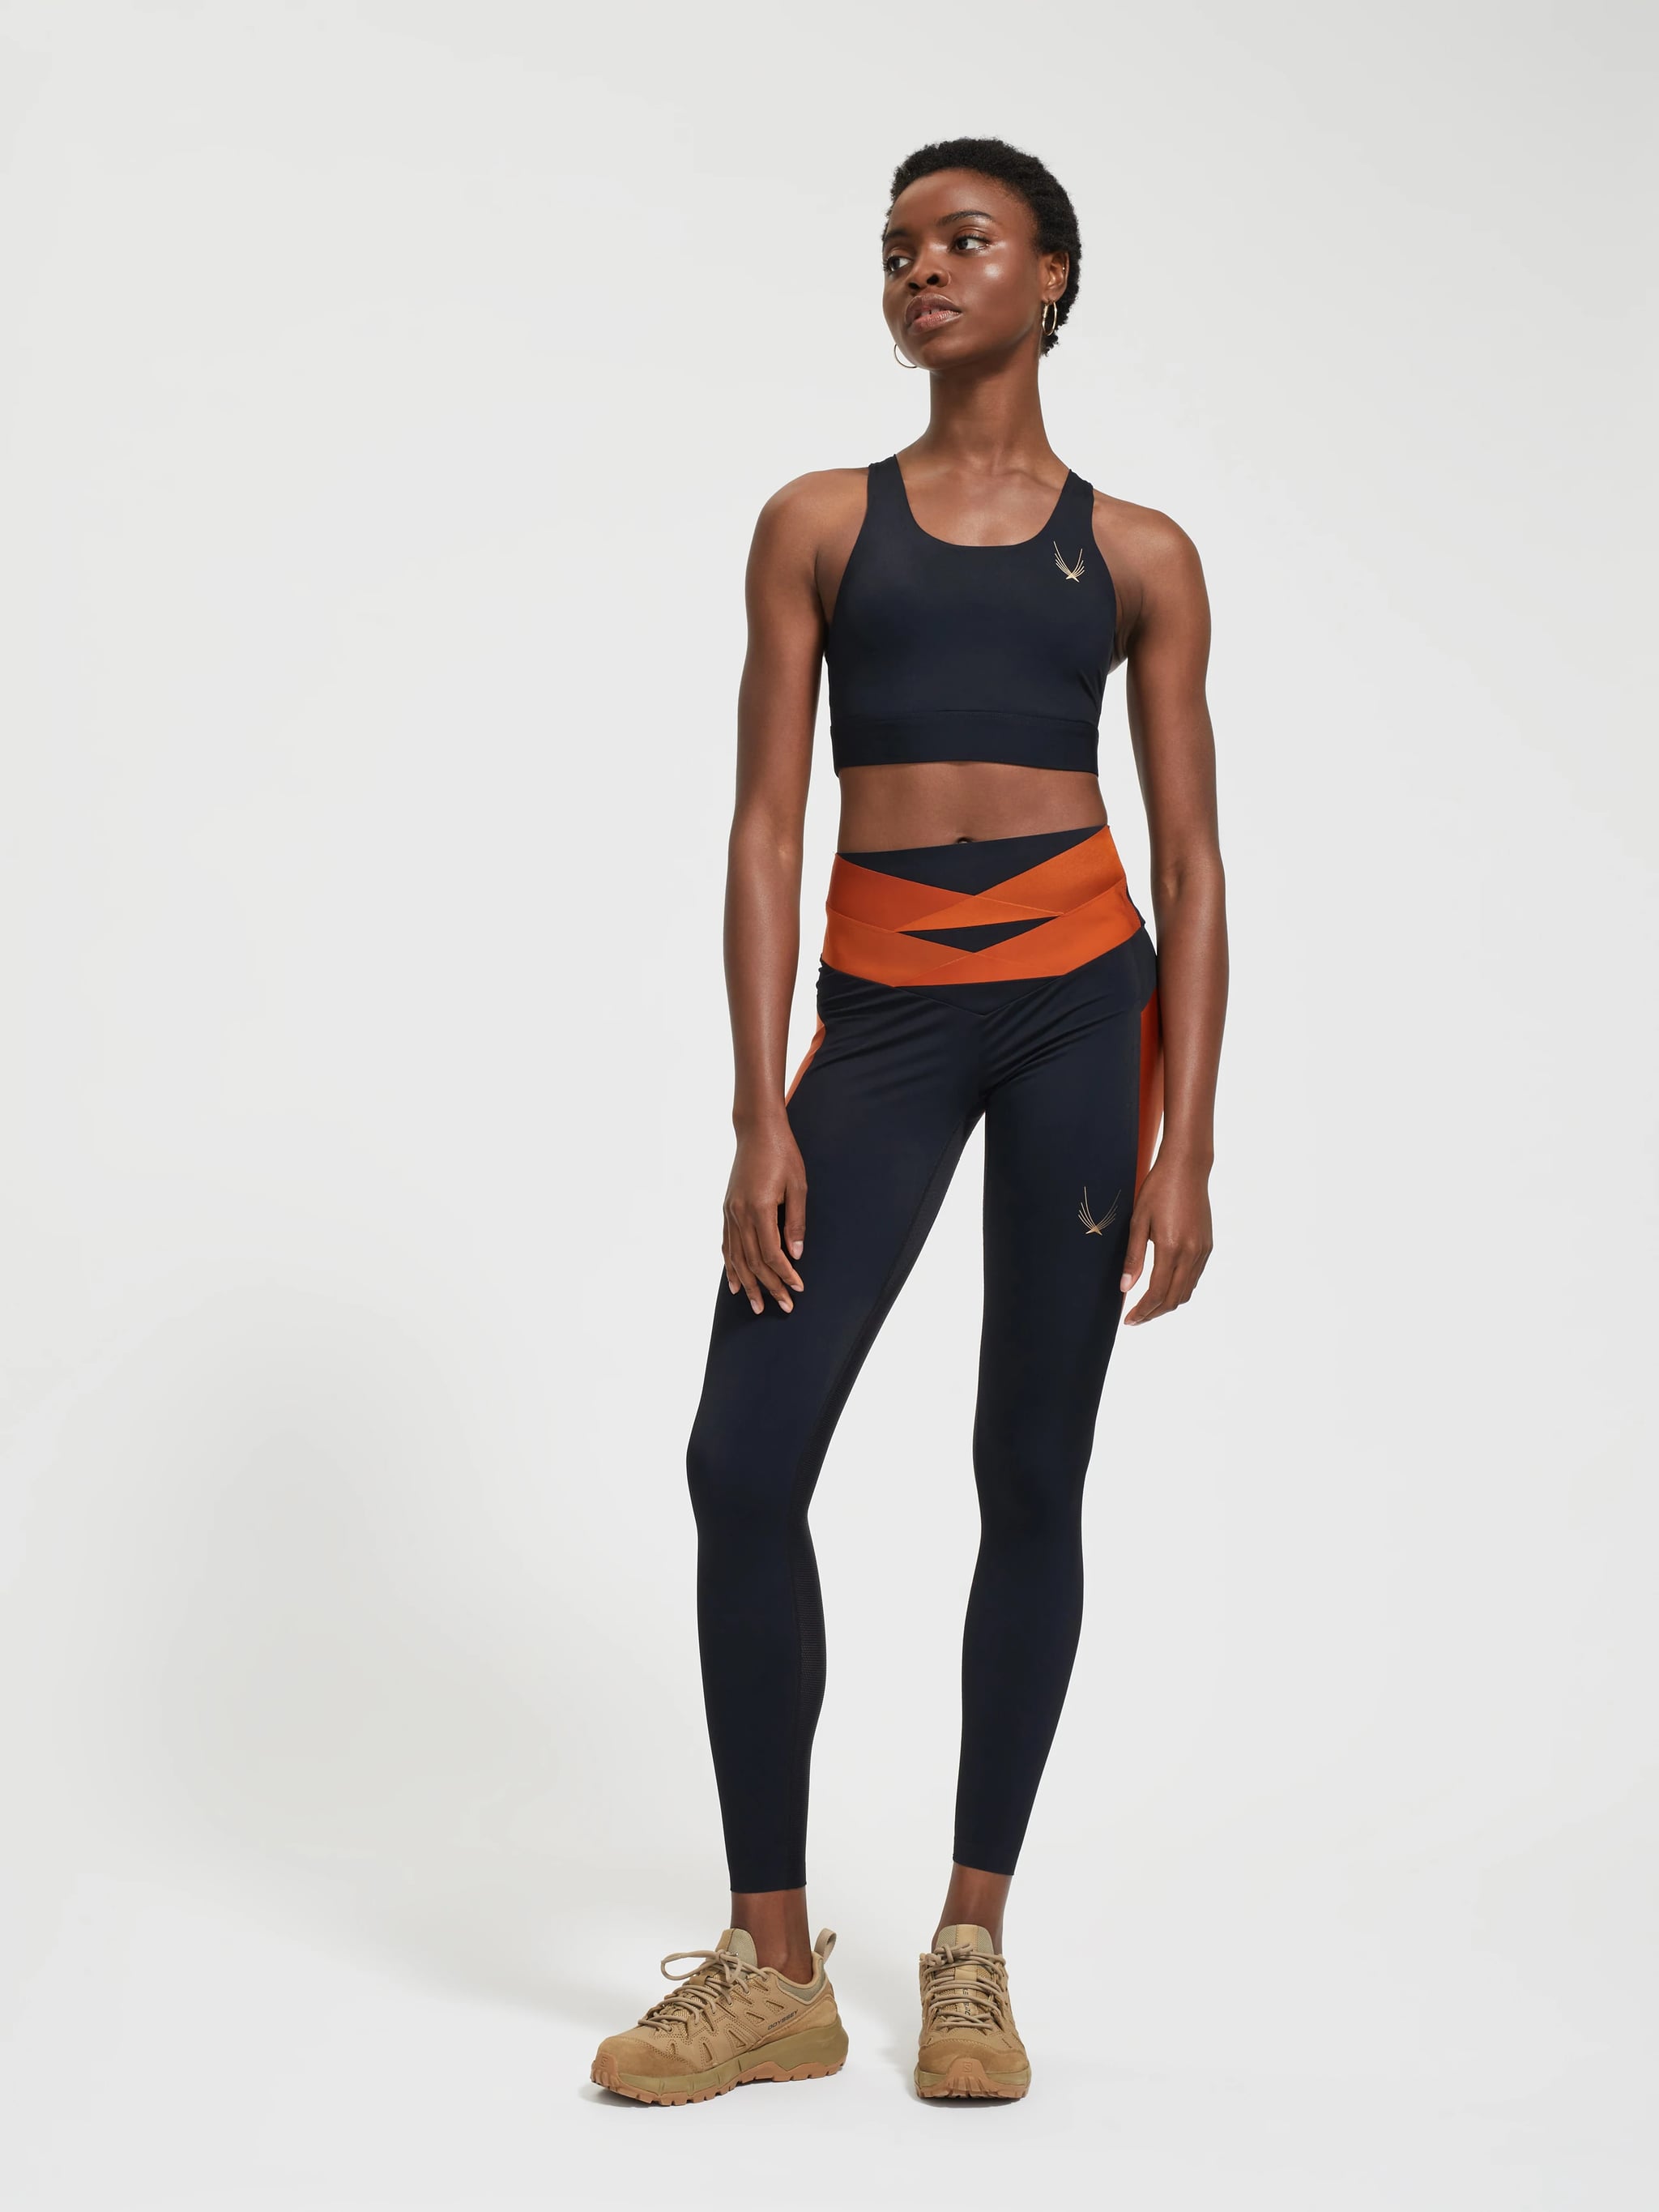 Lucas Hugh Limited Edition Axis Leggings, 11 High-Waisted Leggings to Add  to Your Workout Wardrobe